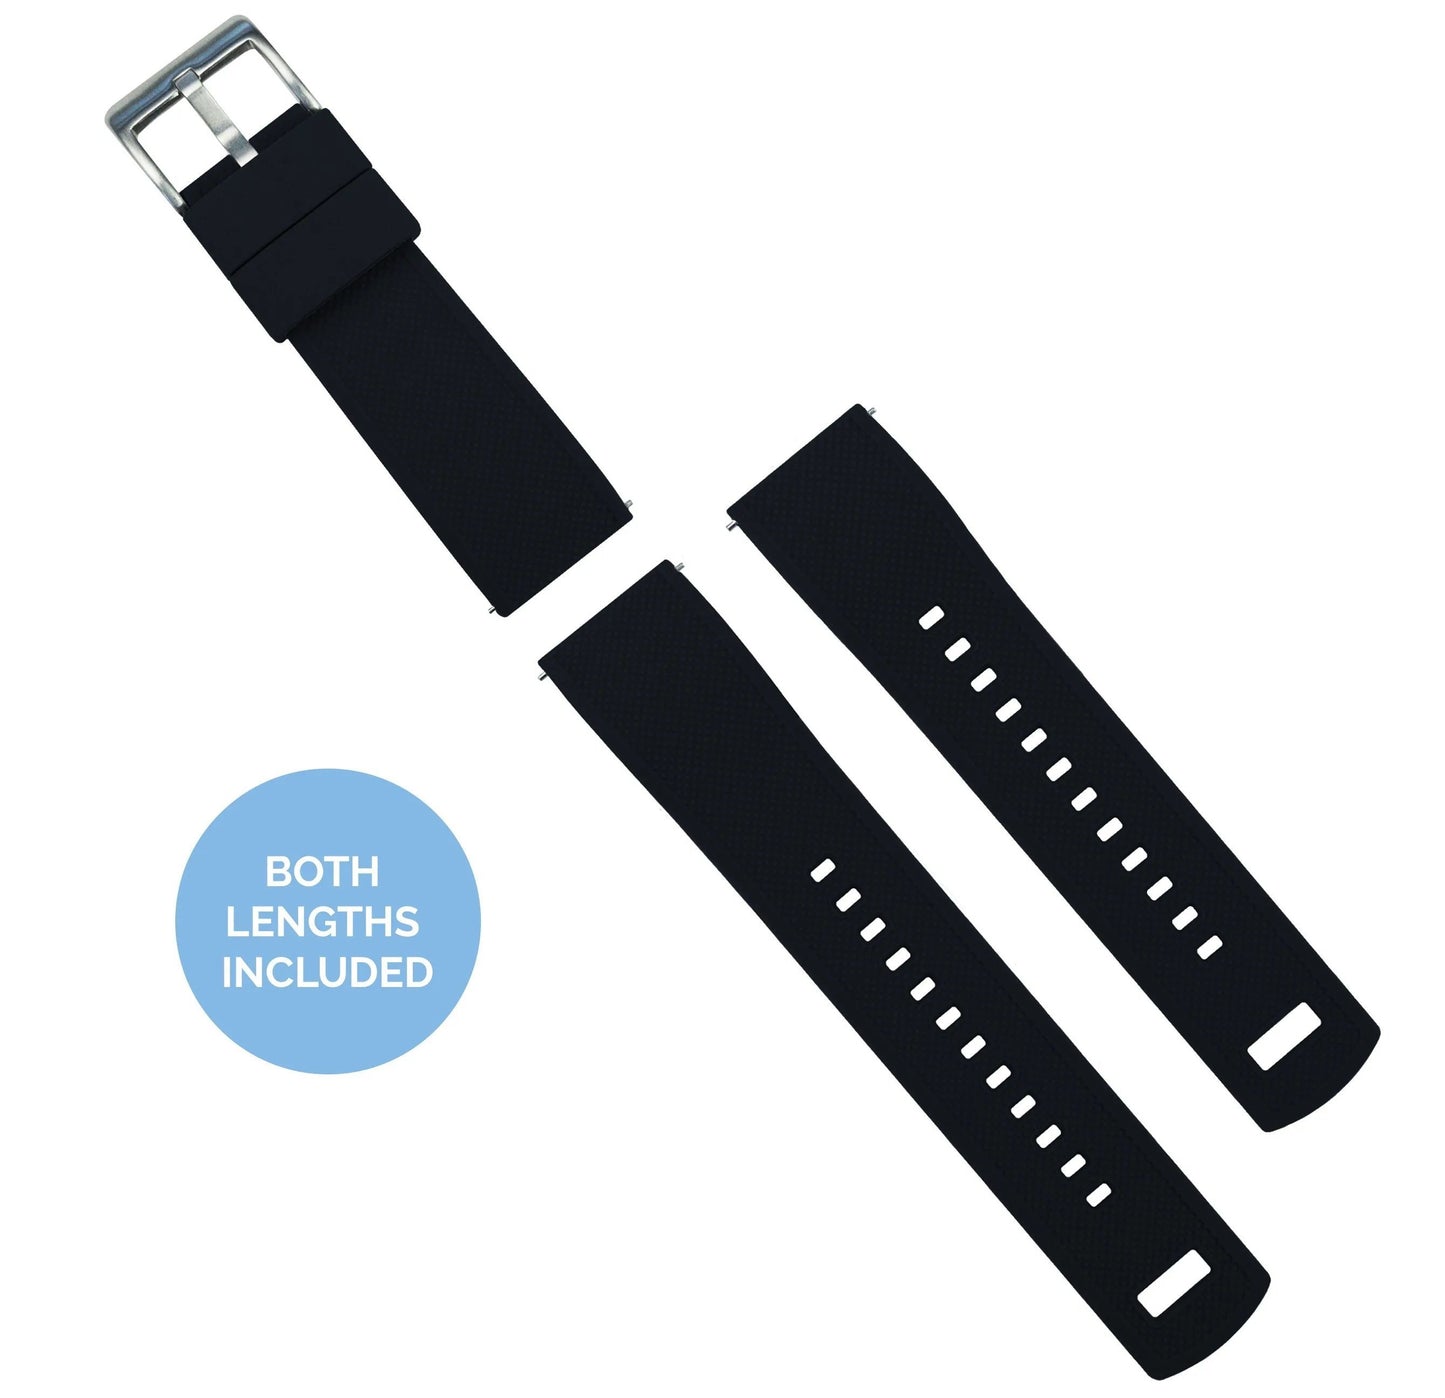 Withings Nokia Activité and Steel HR | Elite Silicone | Black Top / Yellow Bottom - Barton Watch Bands